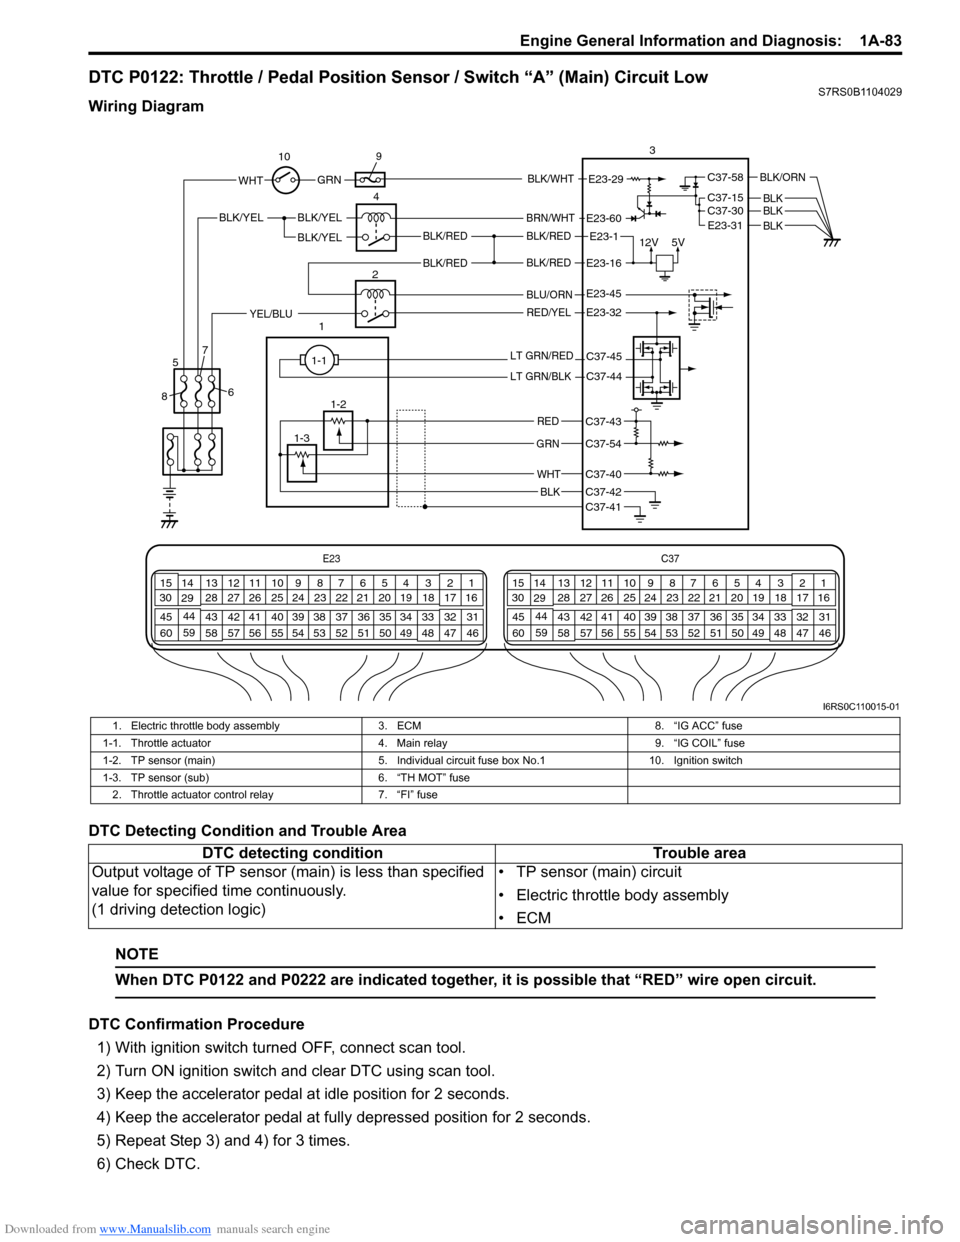 SUZUKI SWIFT 2006 2.G Service Workshop Manual Downloaded from www.Manualslib.com manuals search engine Engine General Information and Diagnosis:  1A-83
DTC P0122: Throttle / Pedal Position Sensor / Switch “A” (Main) Circuit LowS7RS0B1104029
W